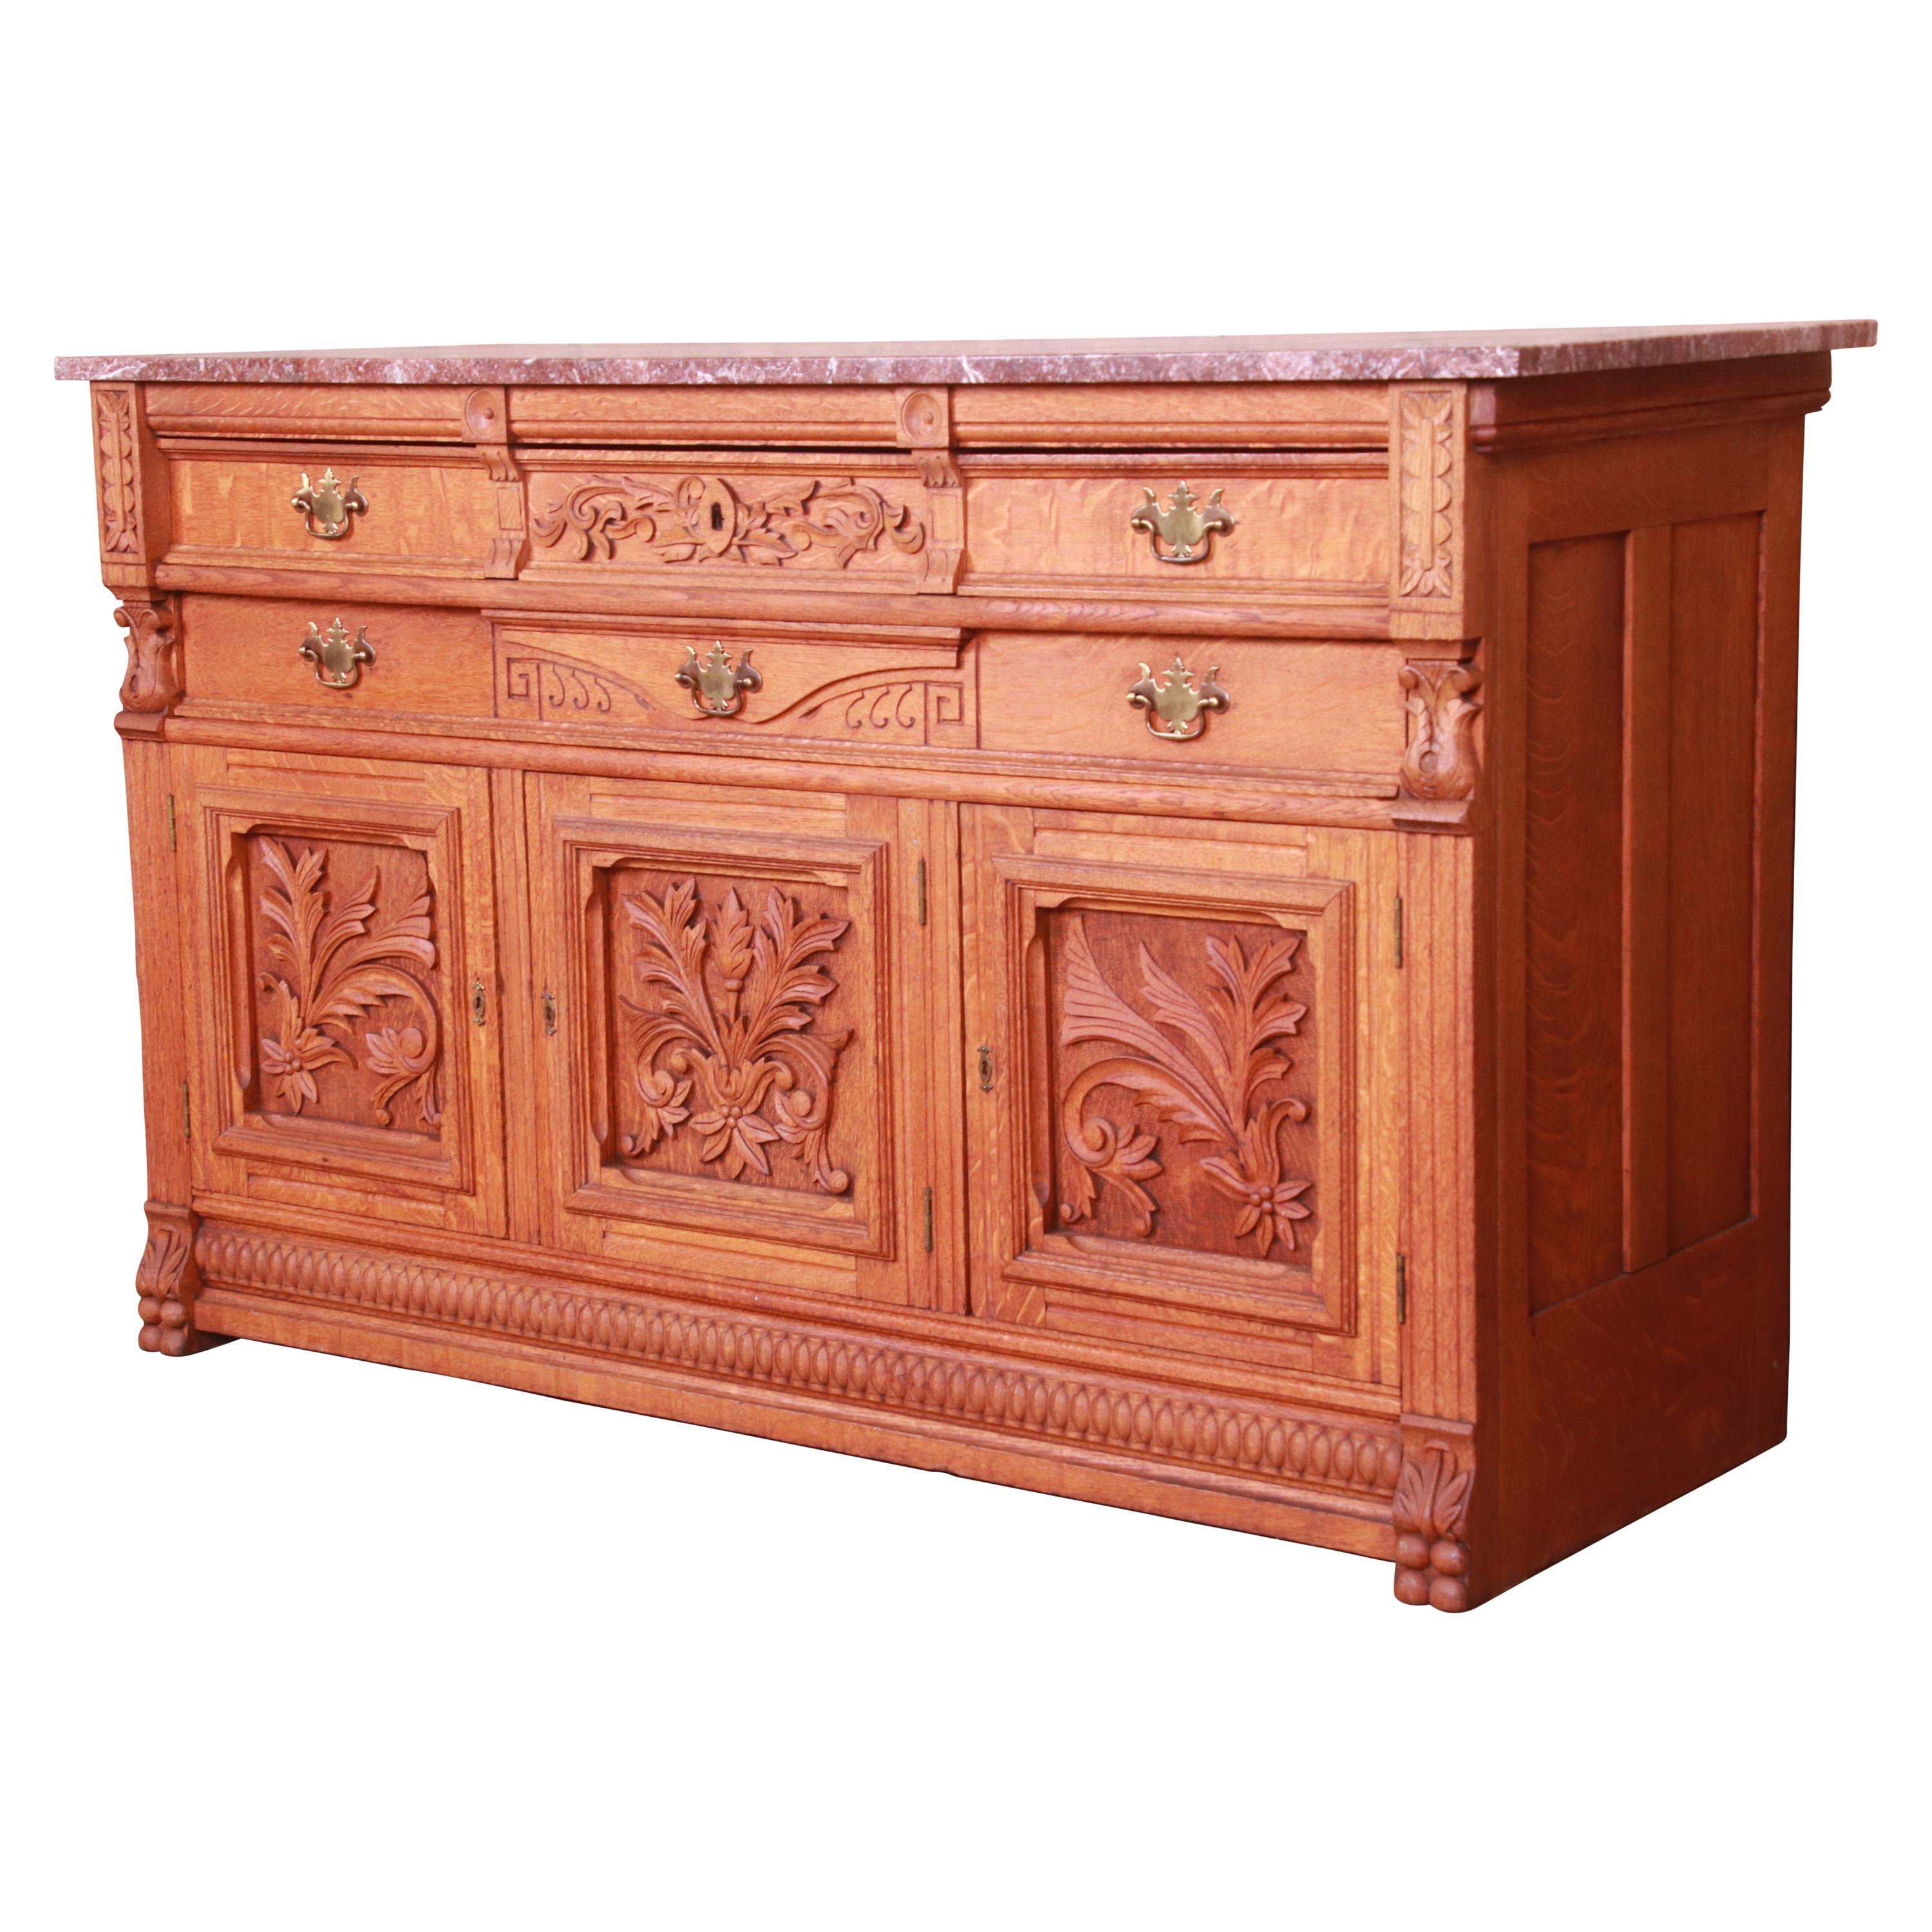 Antique Carved Oak Marble Top Sideboard Attributed to Horner, circa 1890s